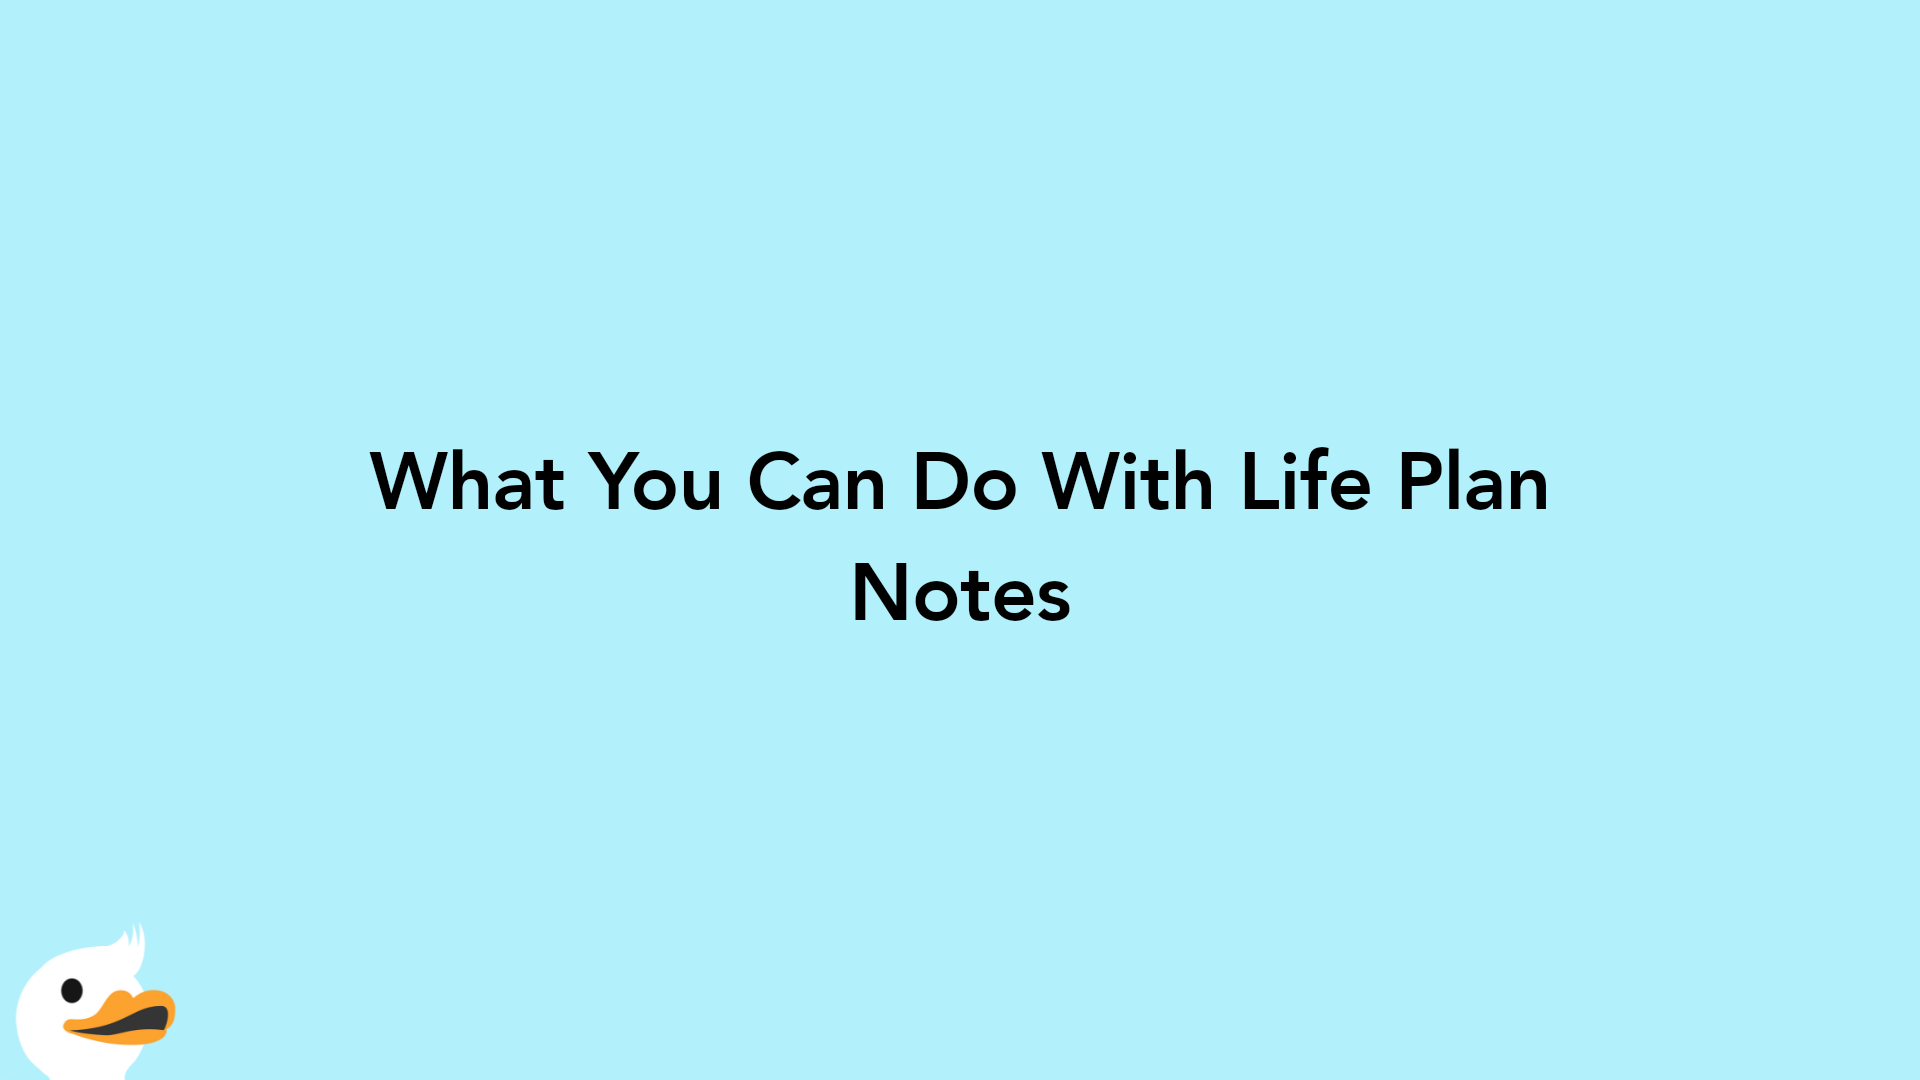 What You Can Do With Life Plan Notes